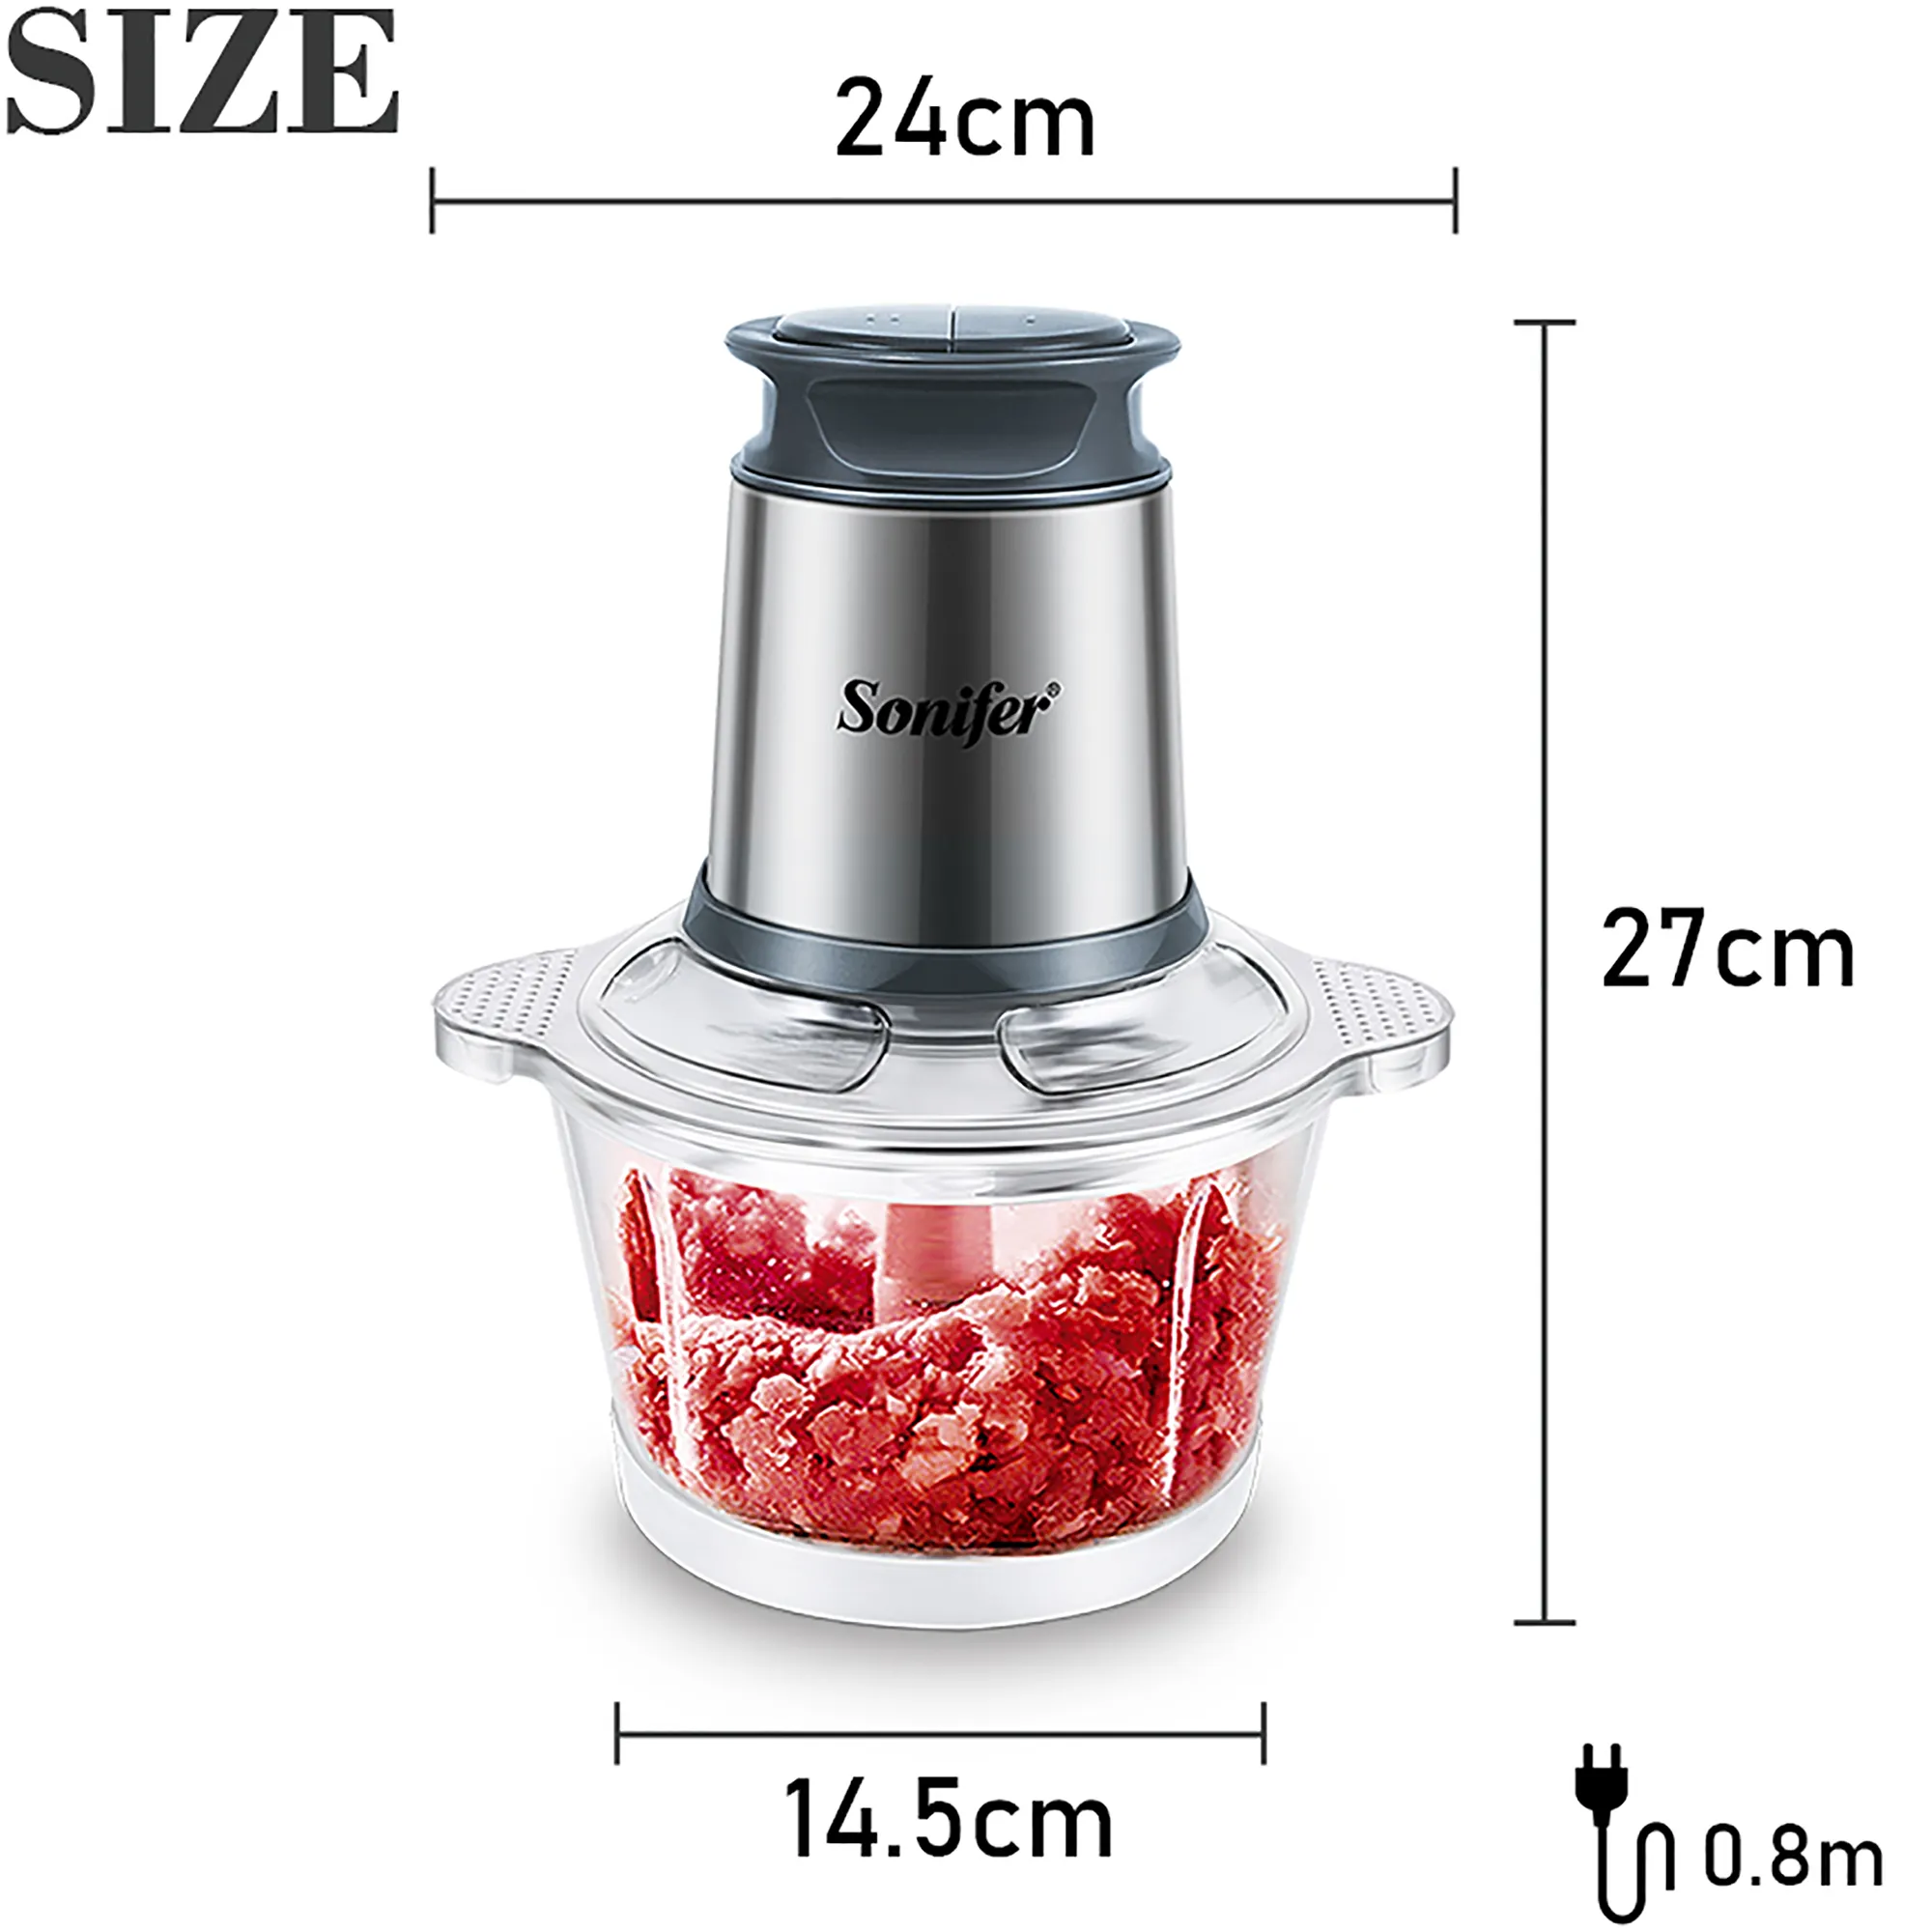 Sonifer Meat Mincer Machine 300W Stainless Steel Home Electric Food Chopper SF-8057